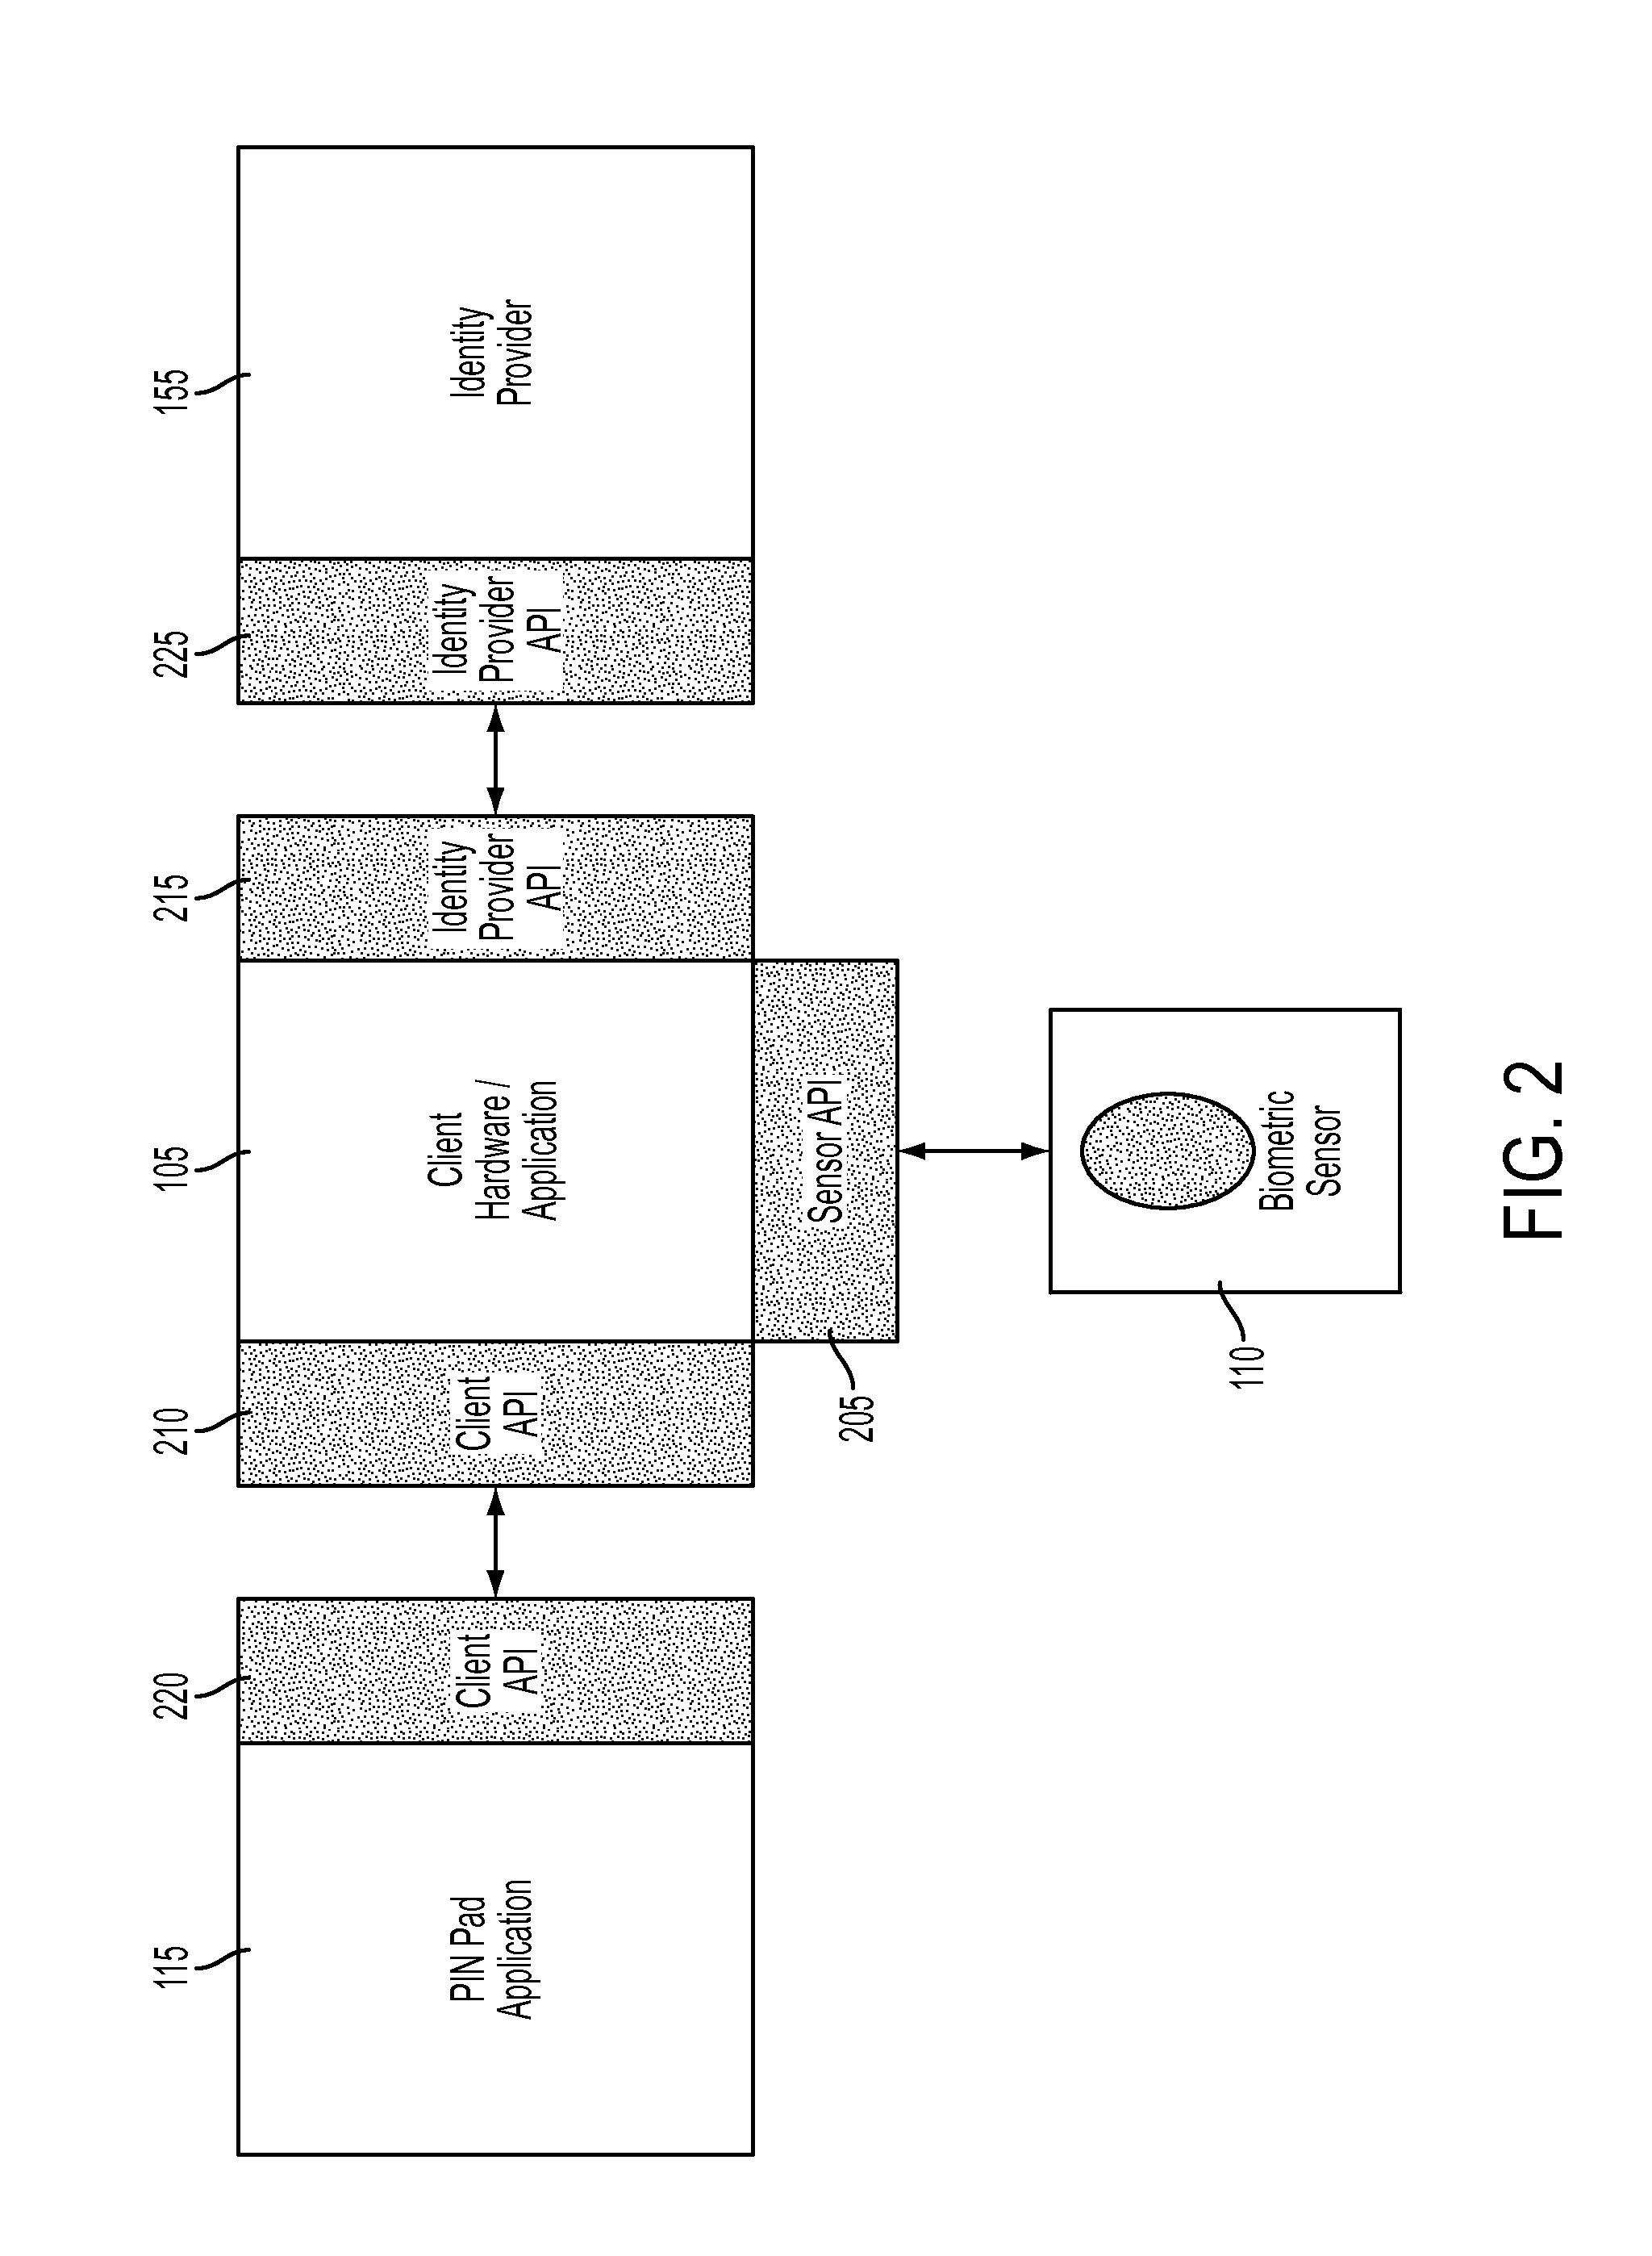 System and architecture for merchant integration of a biometric payment system